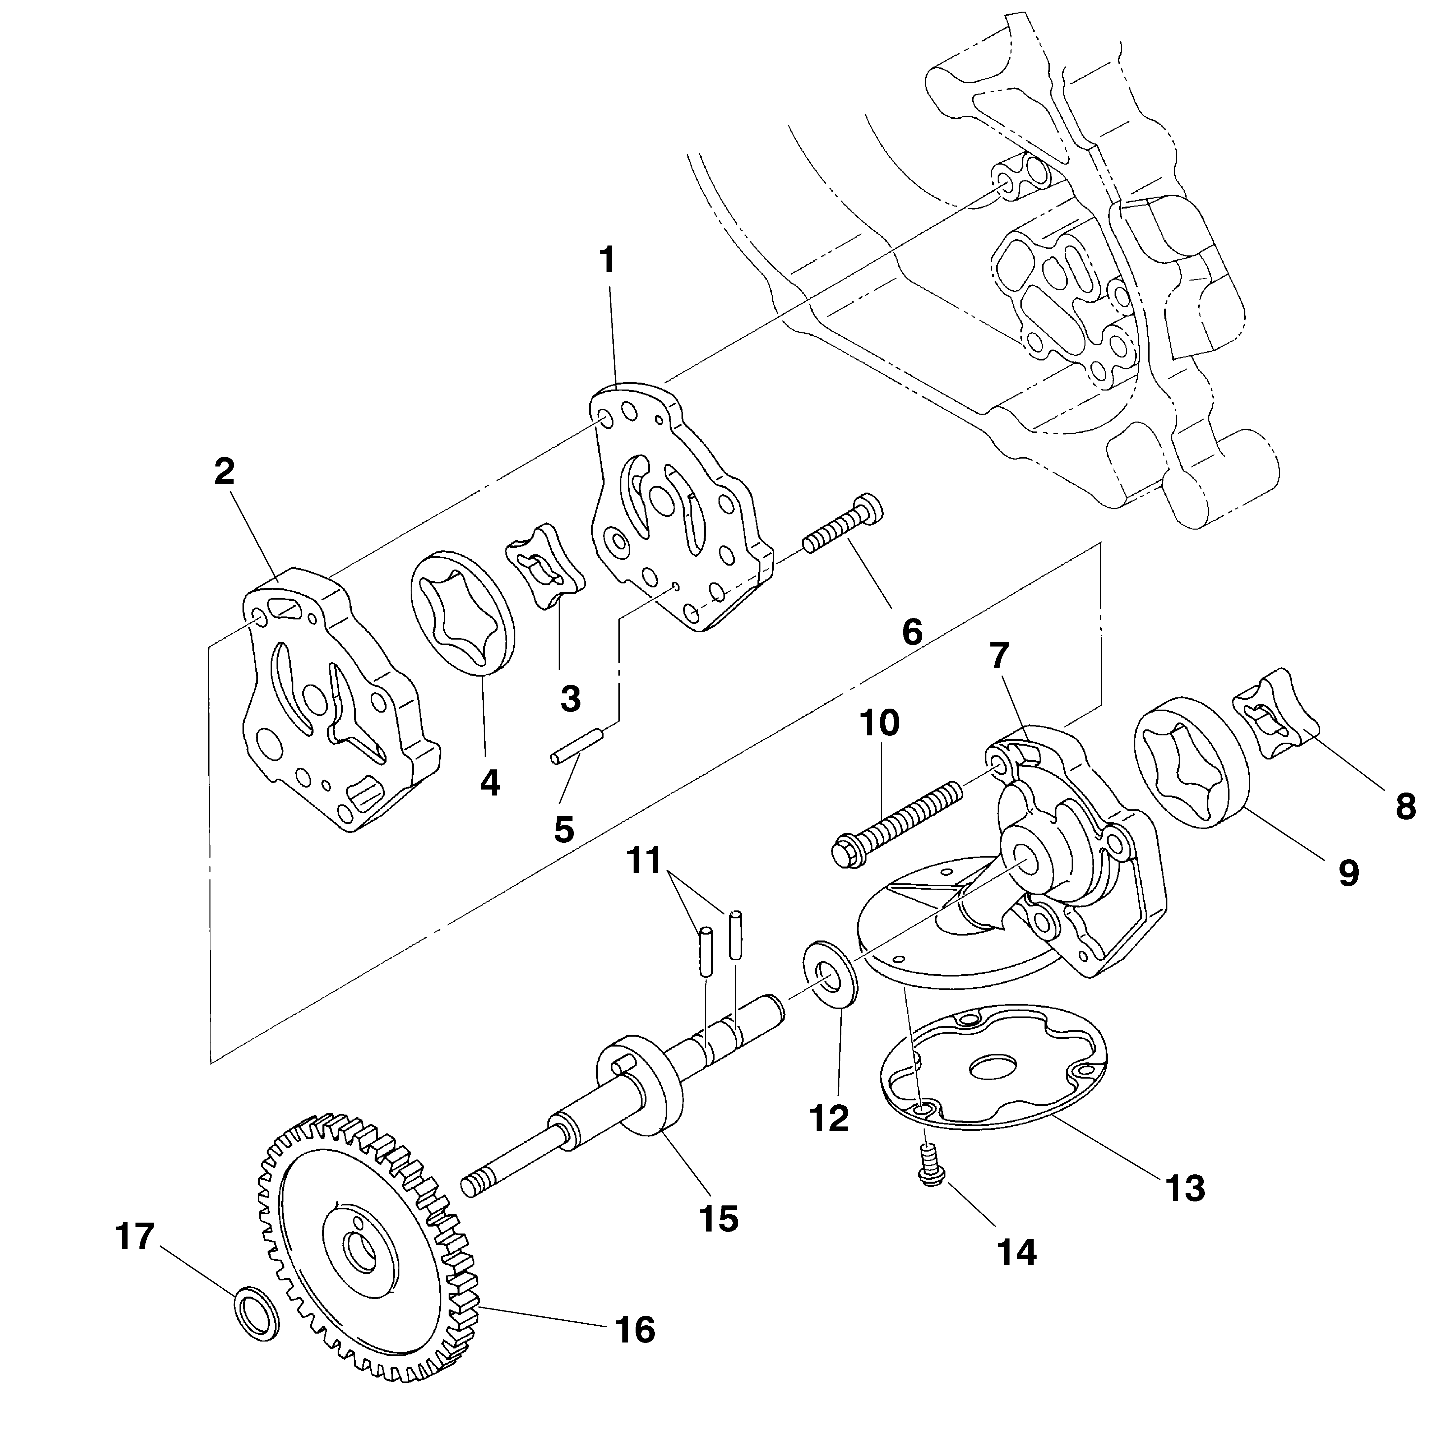 Part Number : 3084953 WASHER(10)